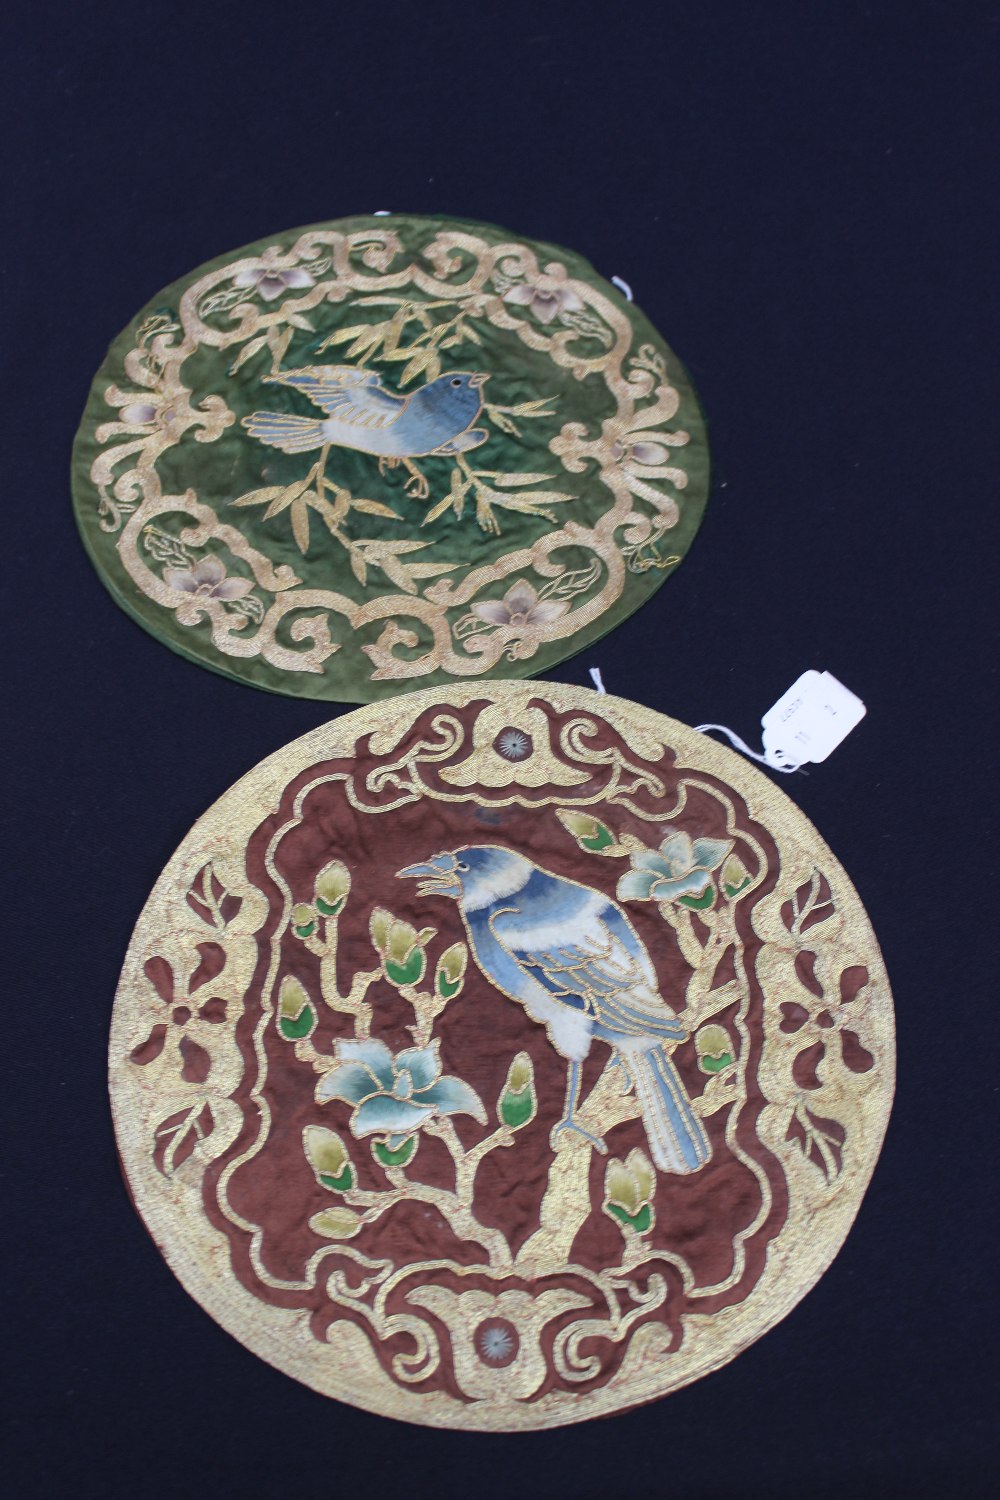 Two circular rondalls, richly embroidered with Chinese birds, Victorian/Edwardian